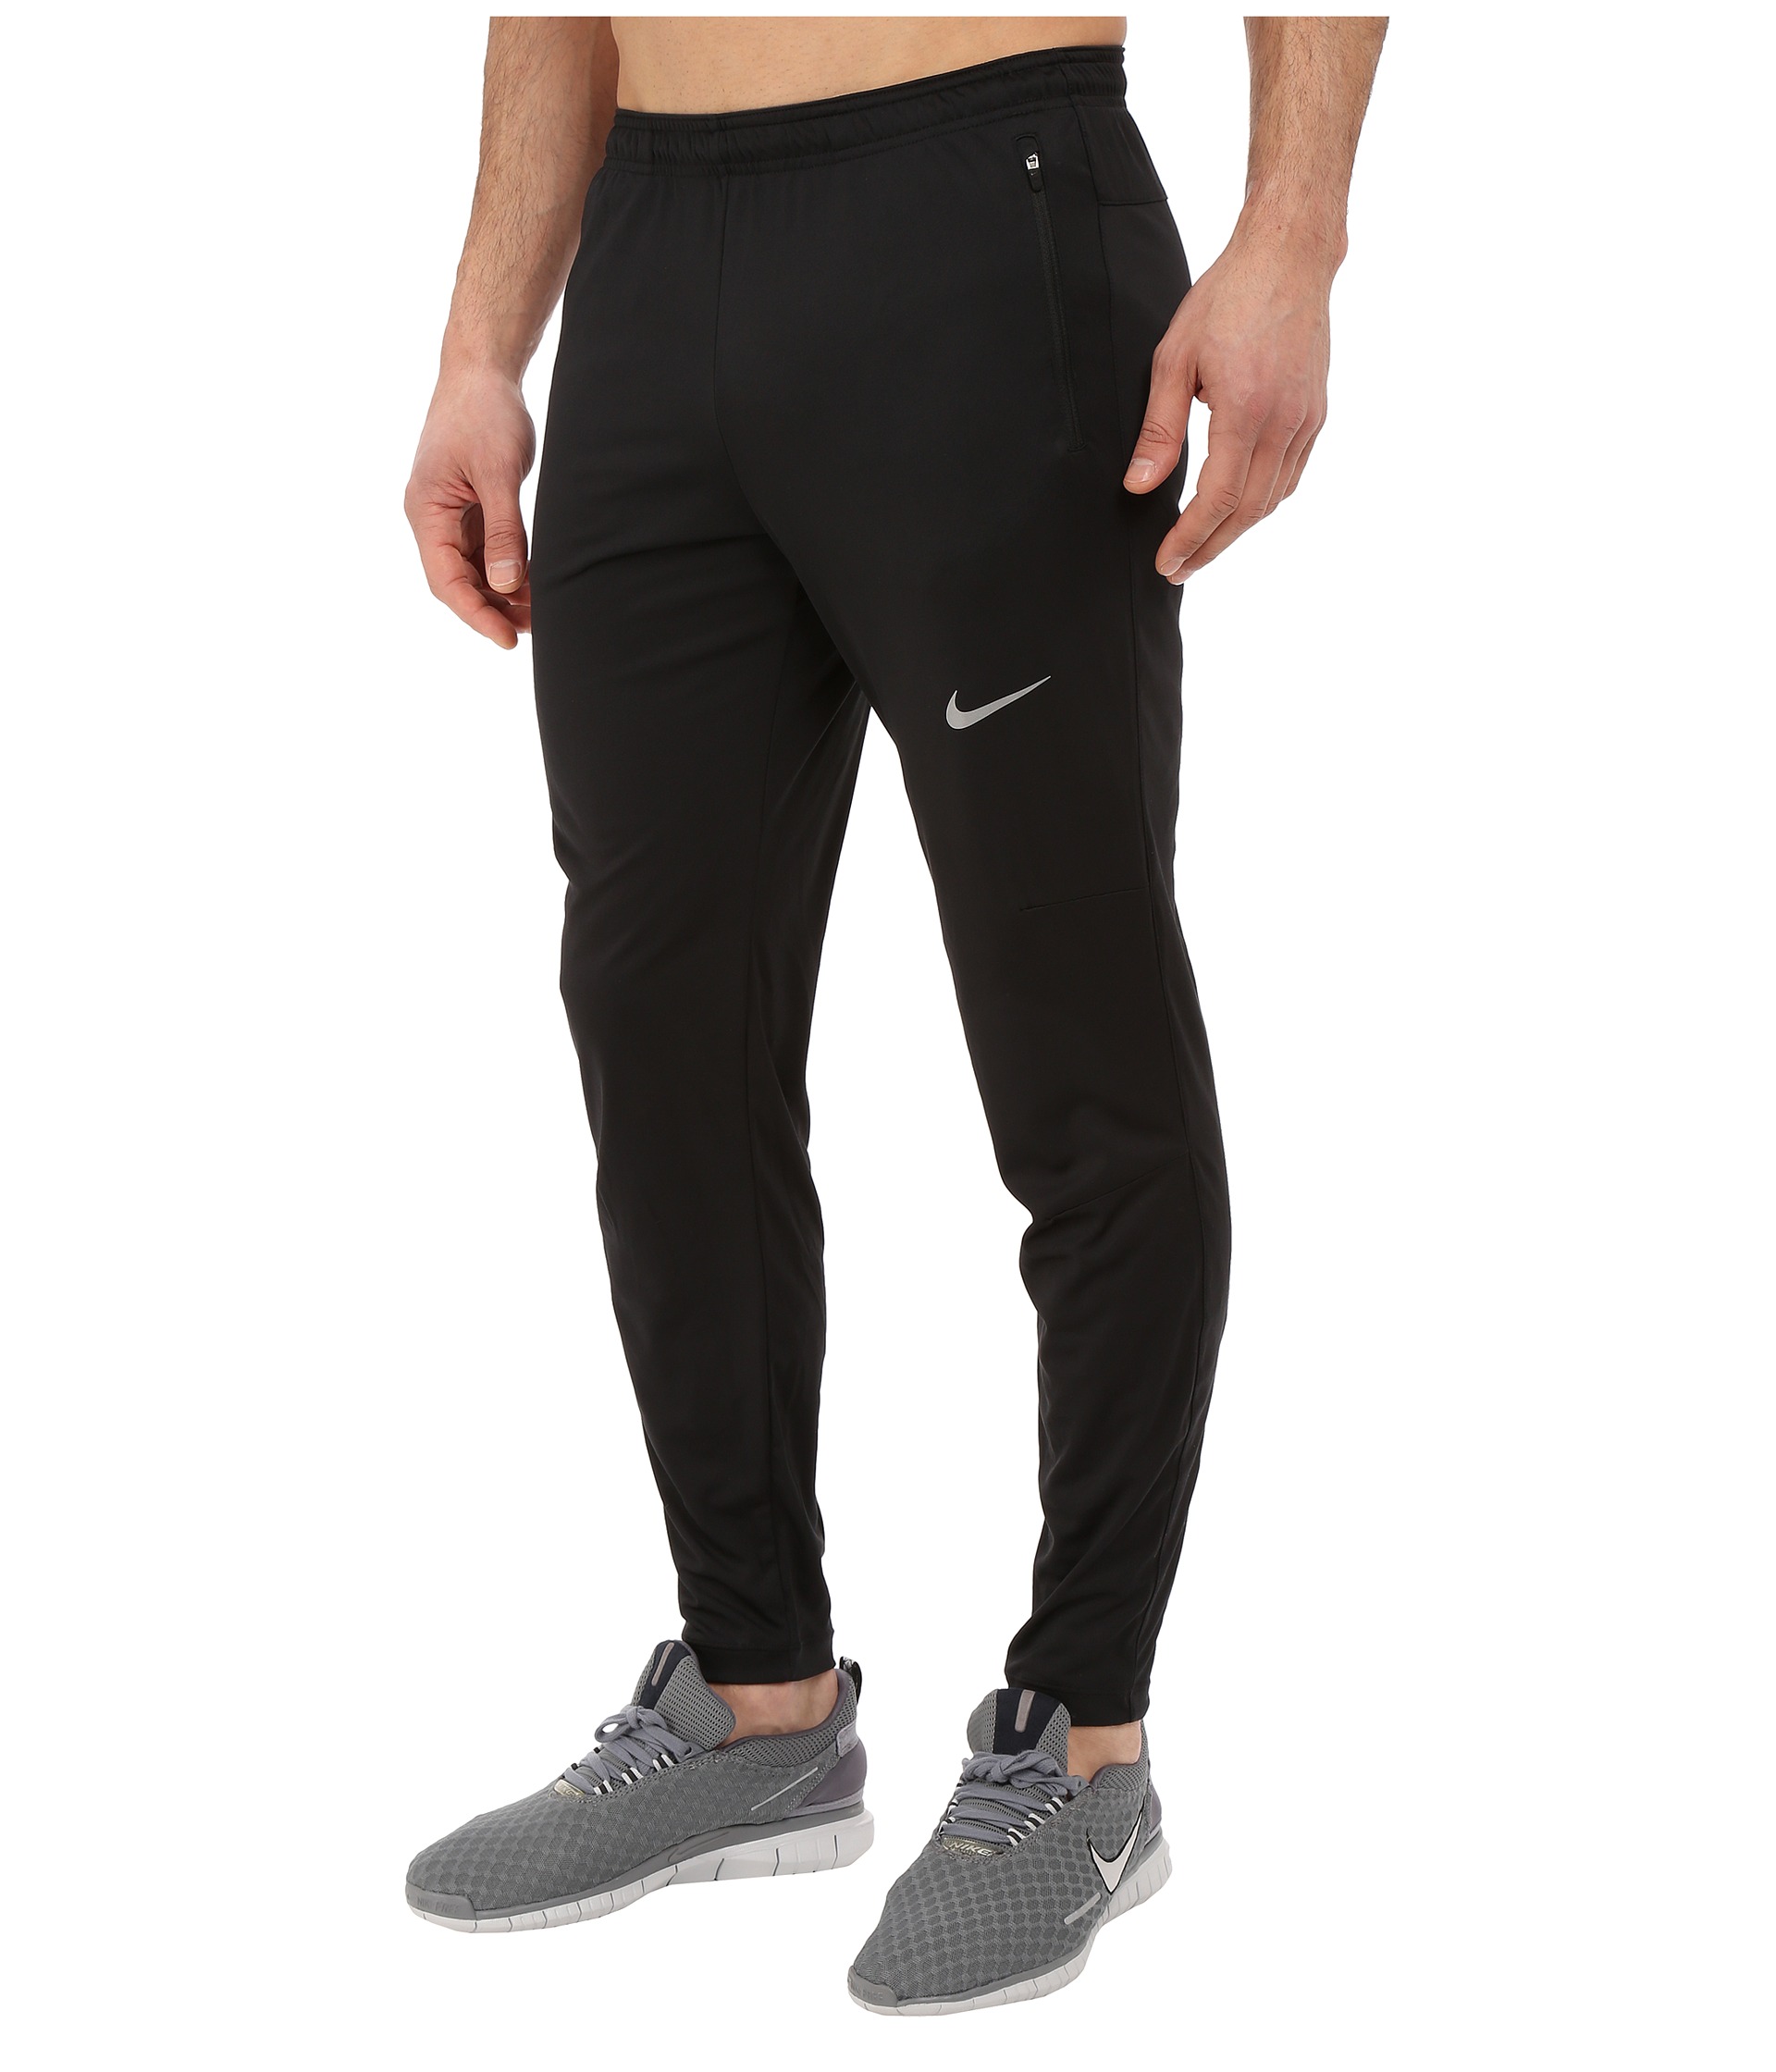 Nike Racer Knit Track Pant - Zappos.com Free Shipping BOTH Ways